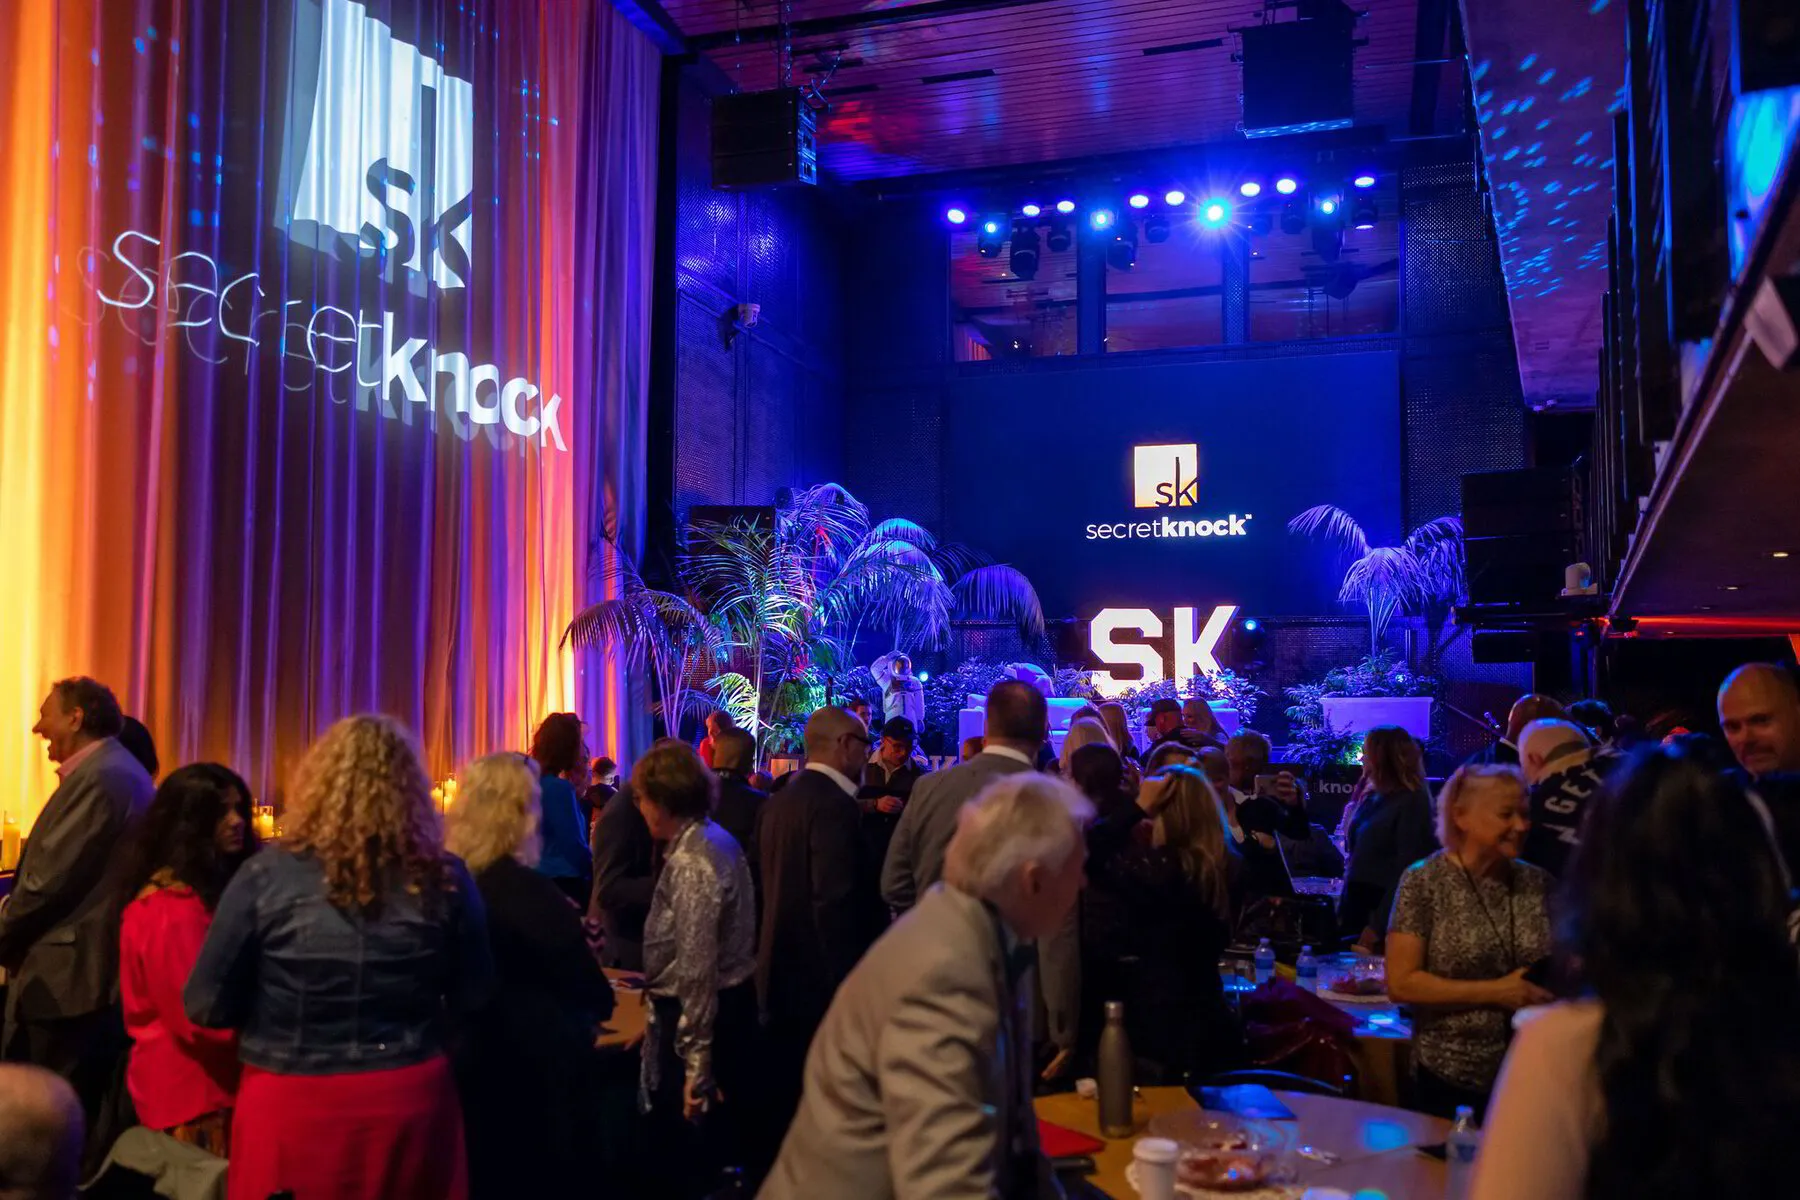 Welcome To Secret Knock, The #1 Networking Event In The World